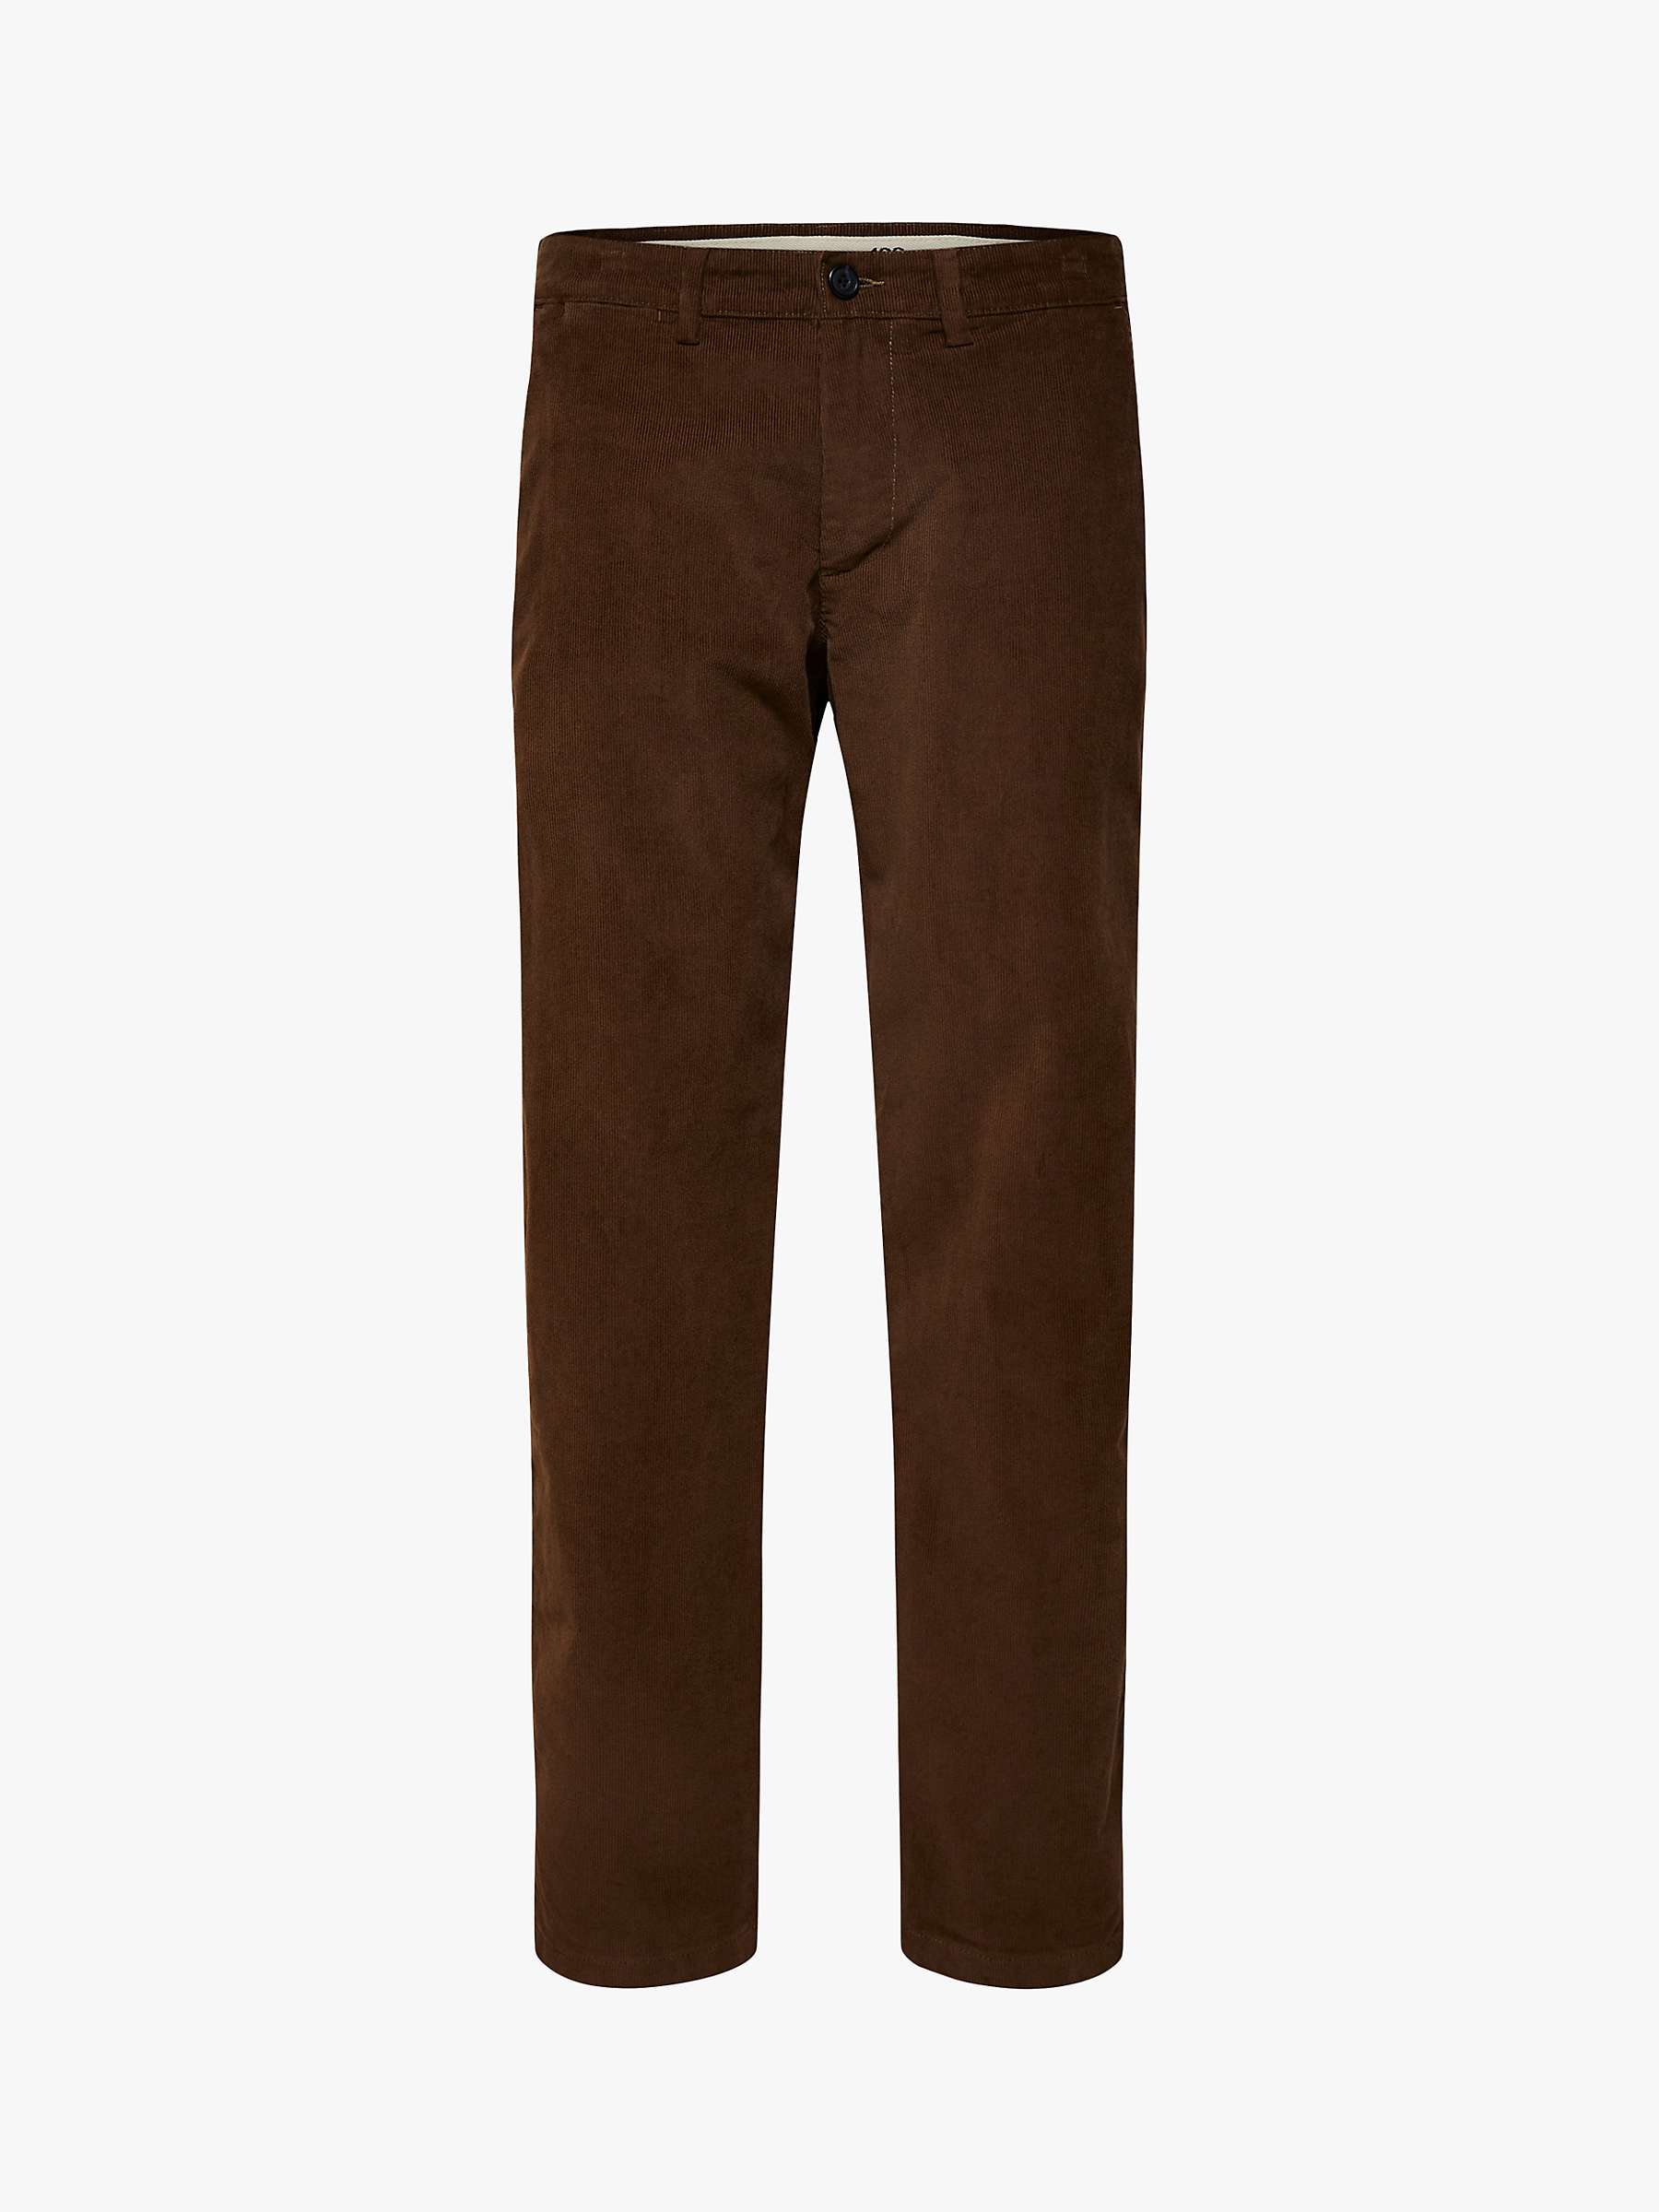 Buy SELECTED HOMME Classic Chino Trousers Online at johnlewis.com